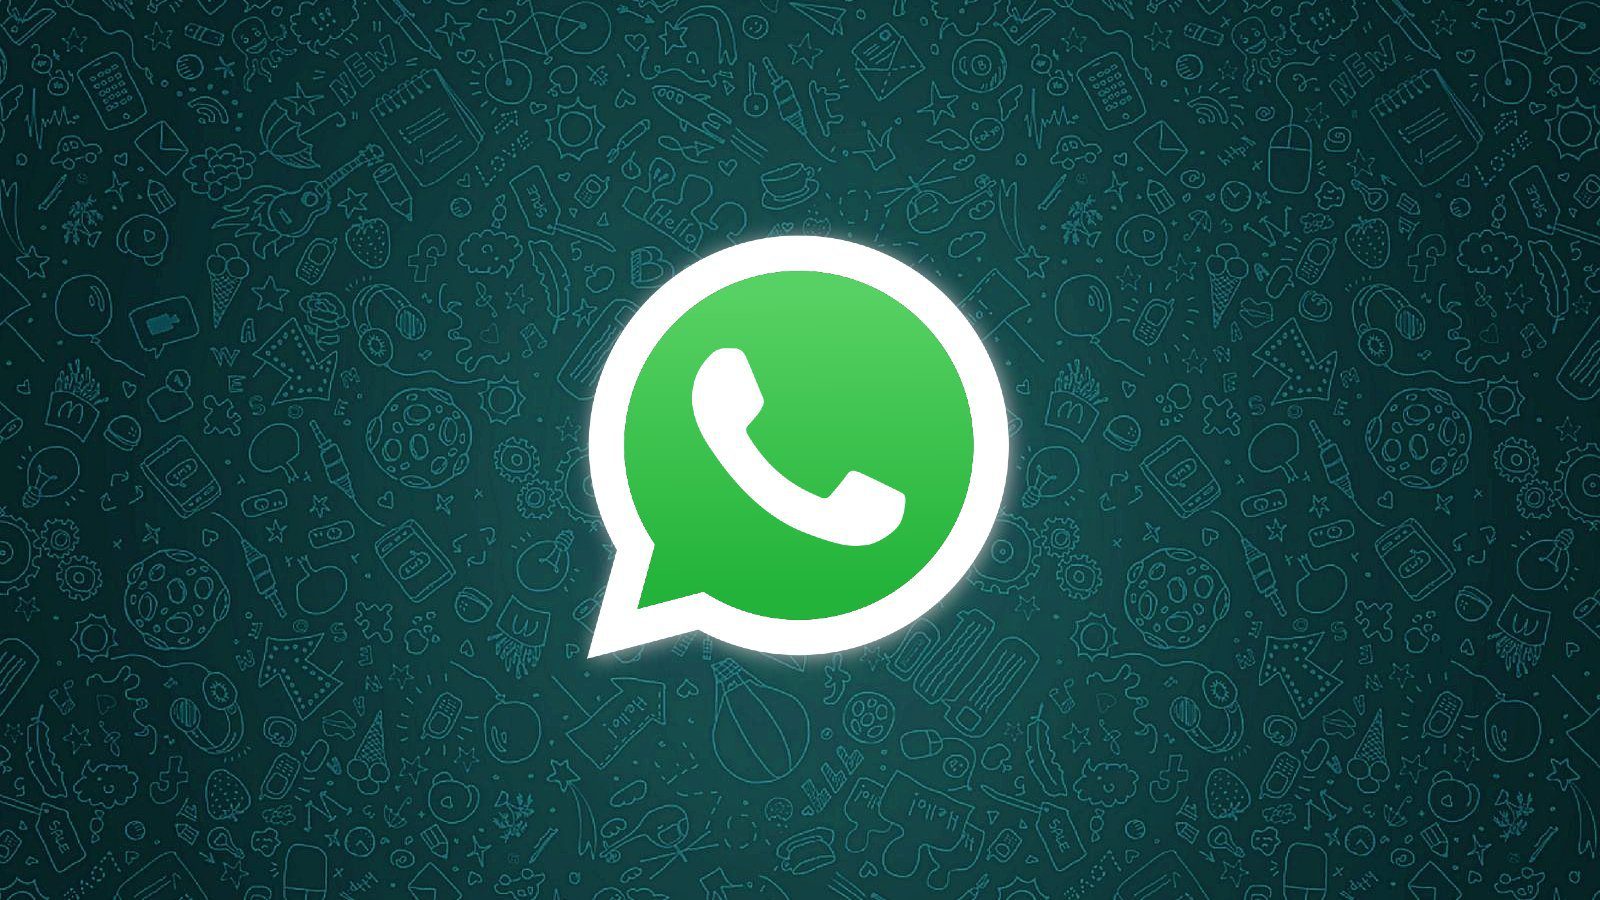 WhatsApp now lets you lock chats with a password or fingerprint – Source: www.bleepingcomputer.com